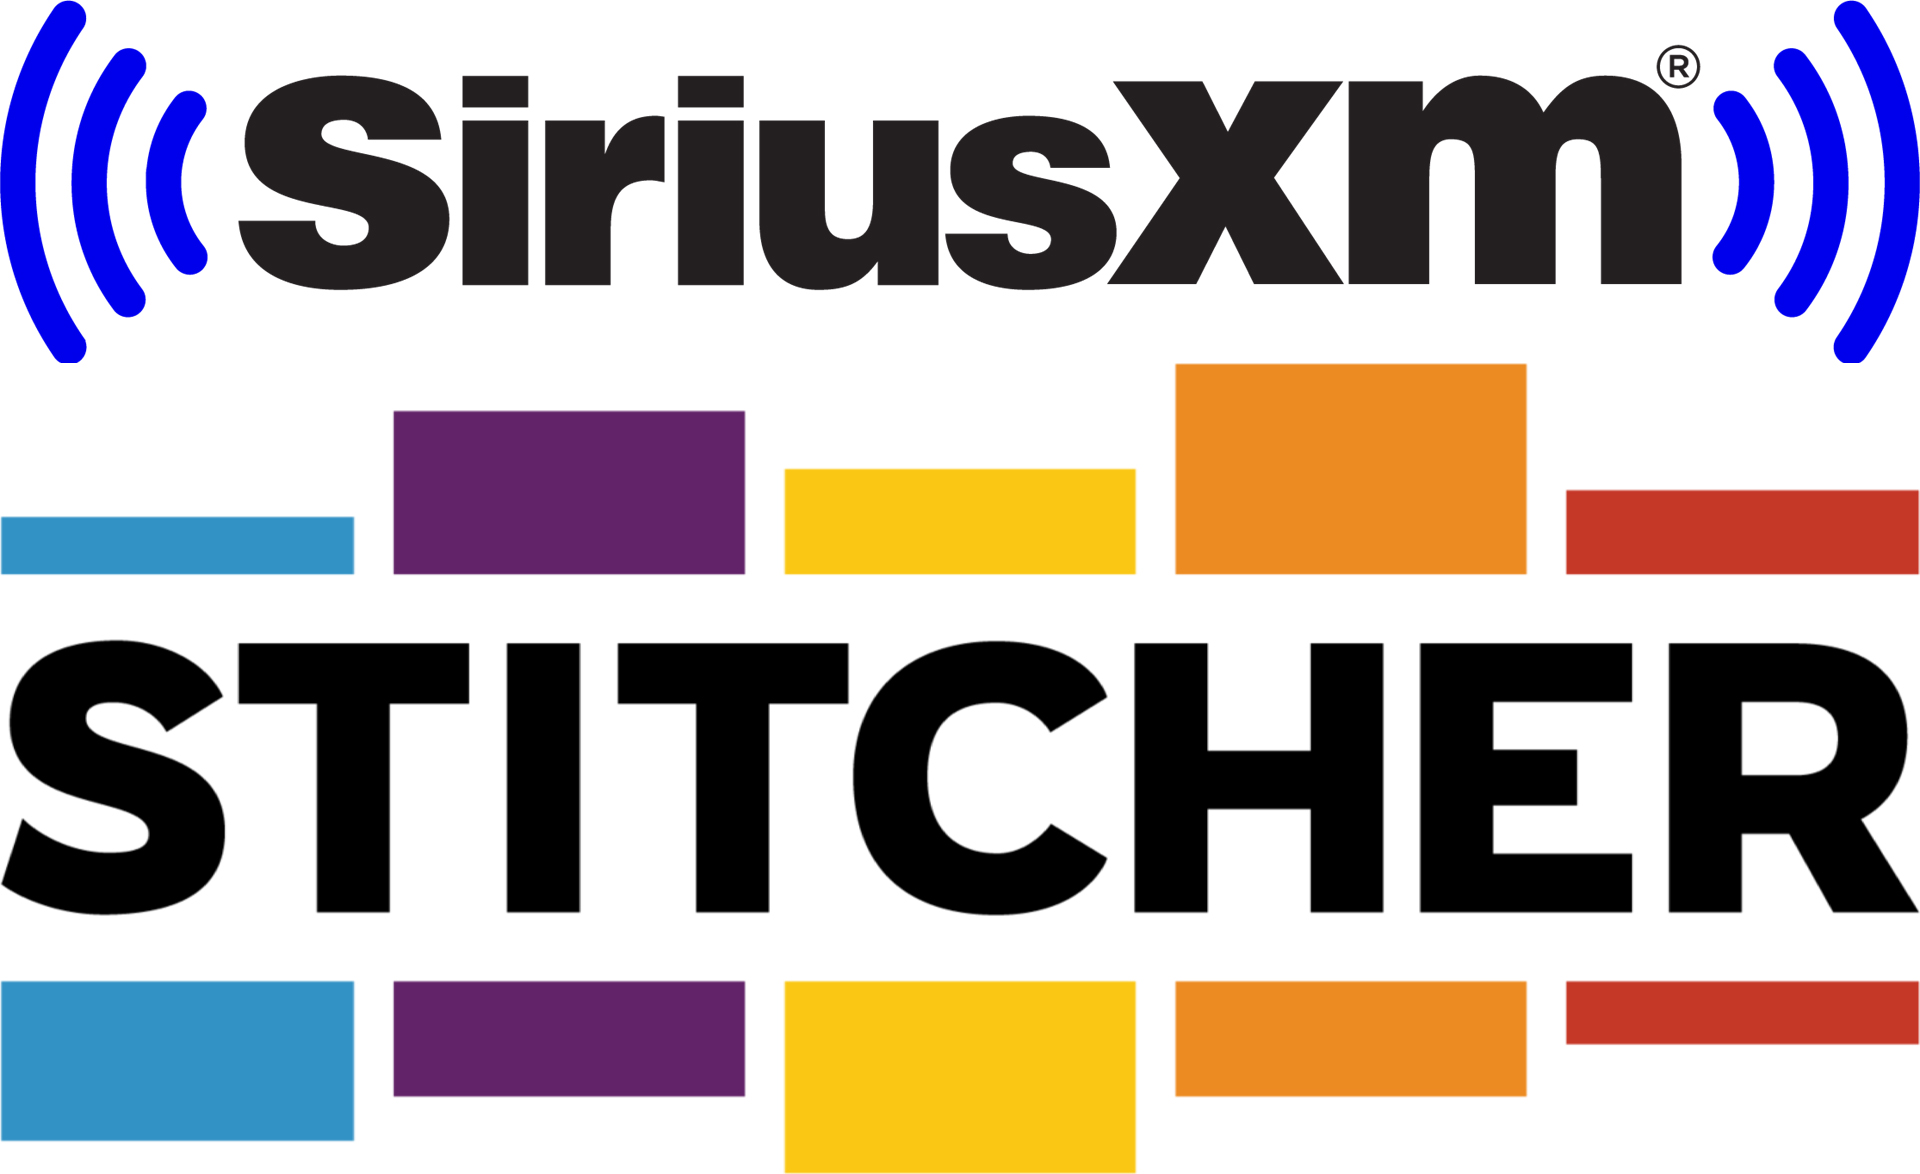 SiriusXM to buy Stitcher for 67x more than Deezer sold it for in 2016